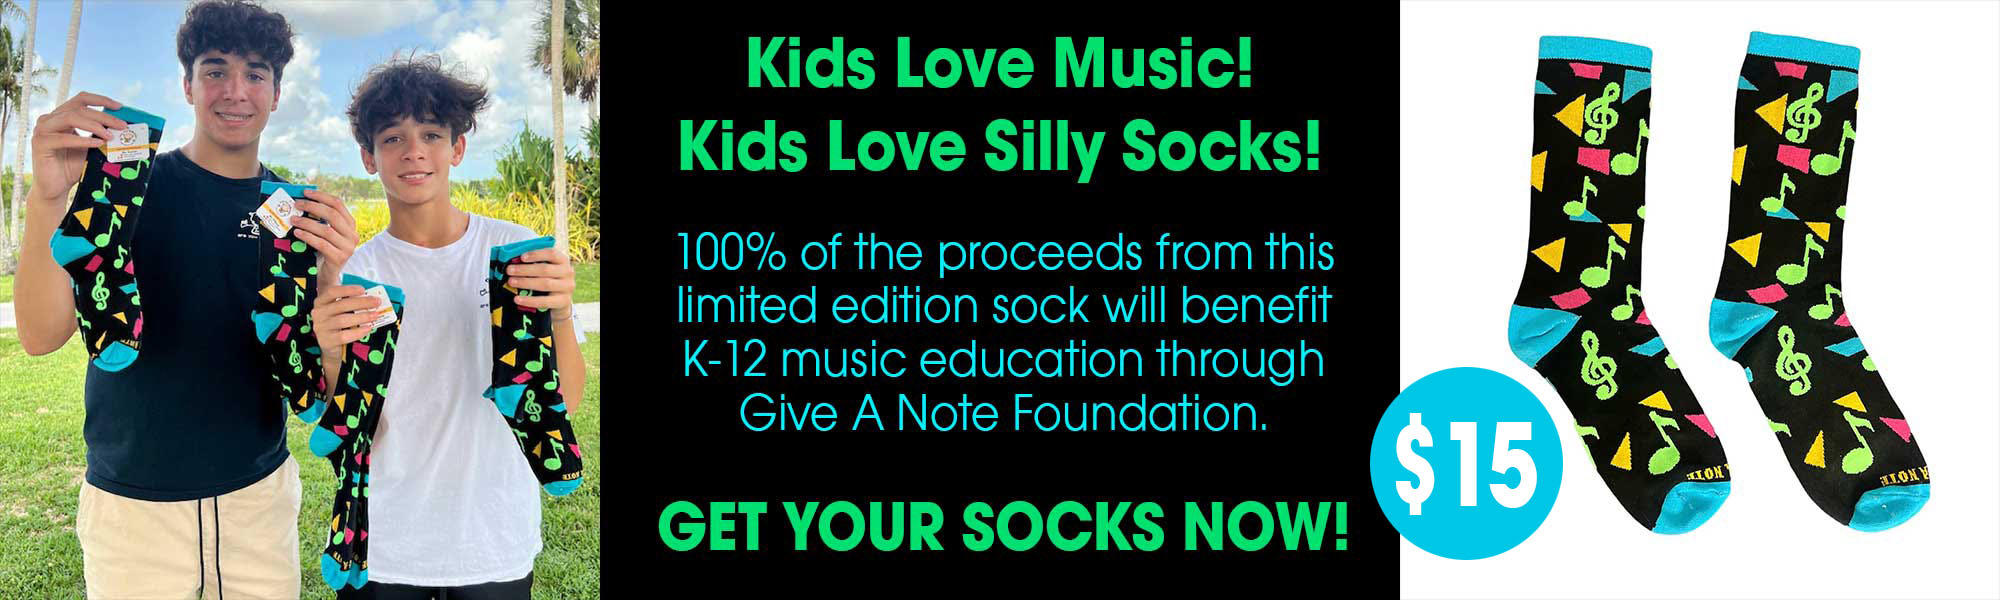 Give-A-Note Socks